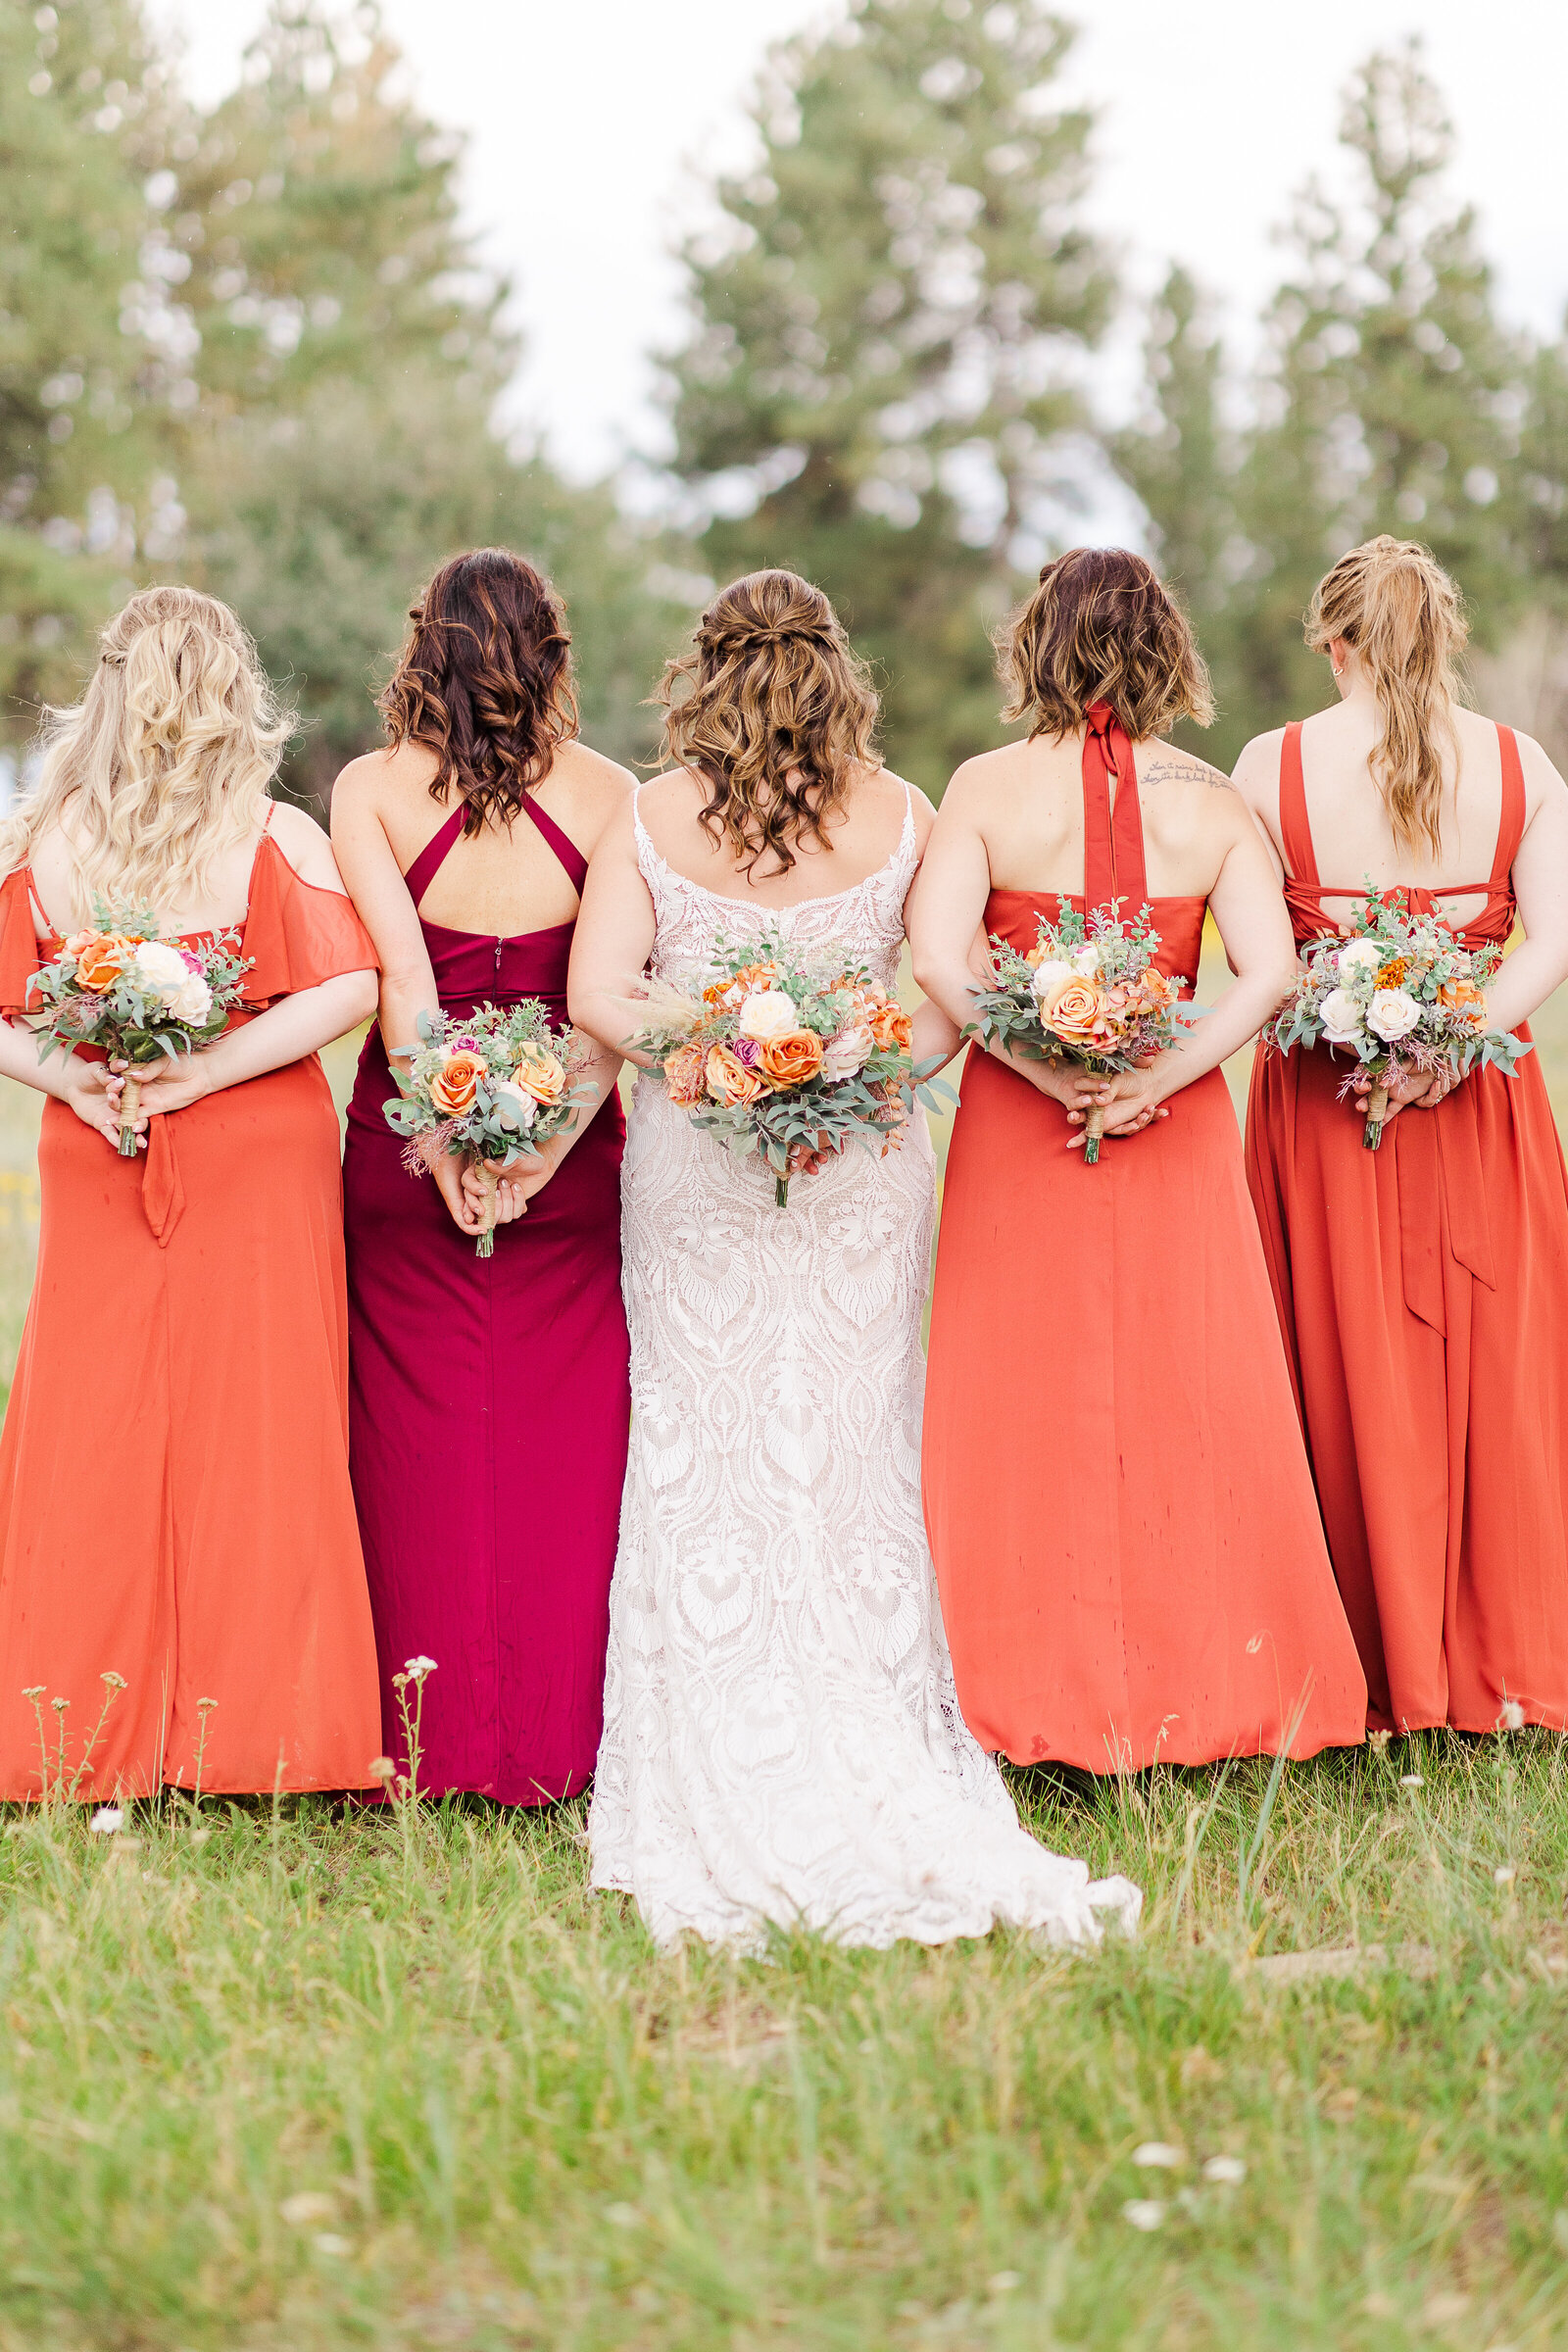 Back shot of bride and bridesmaids with bouquets